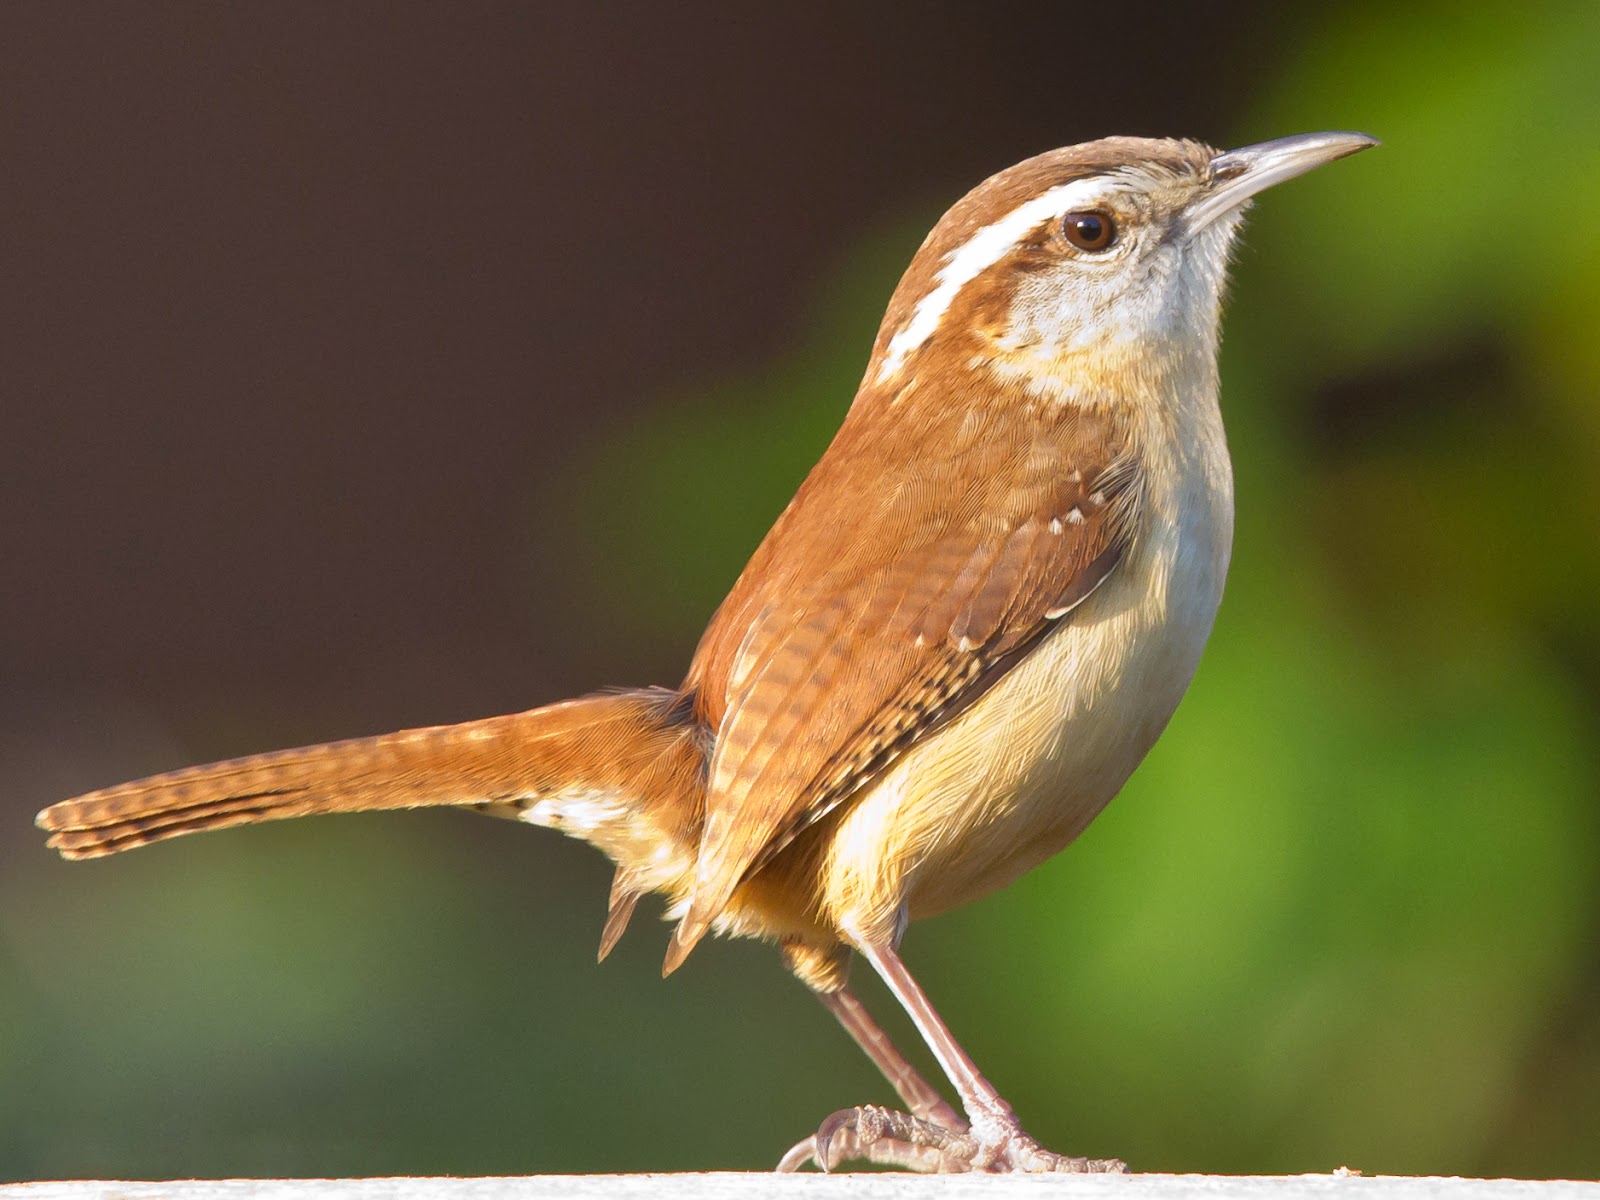 Farm Dover: Little Brown Bird with Incredible Talents